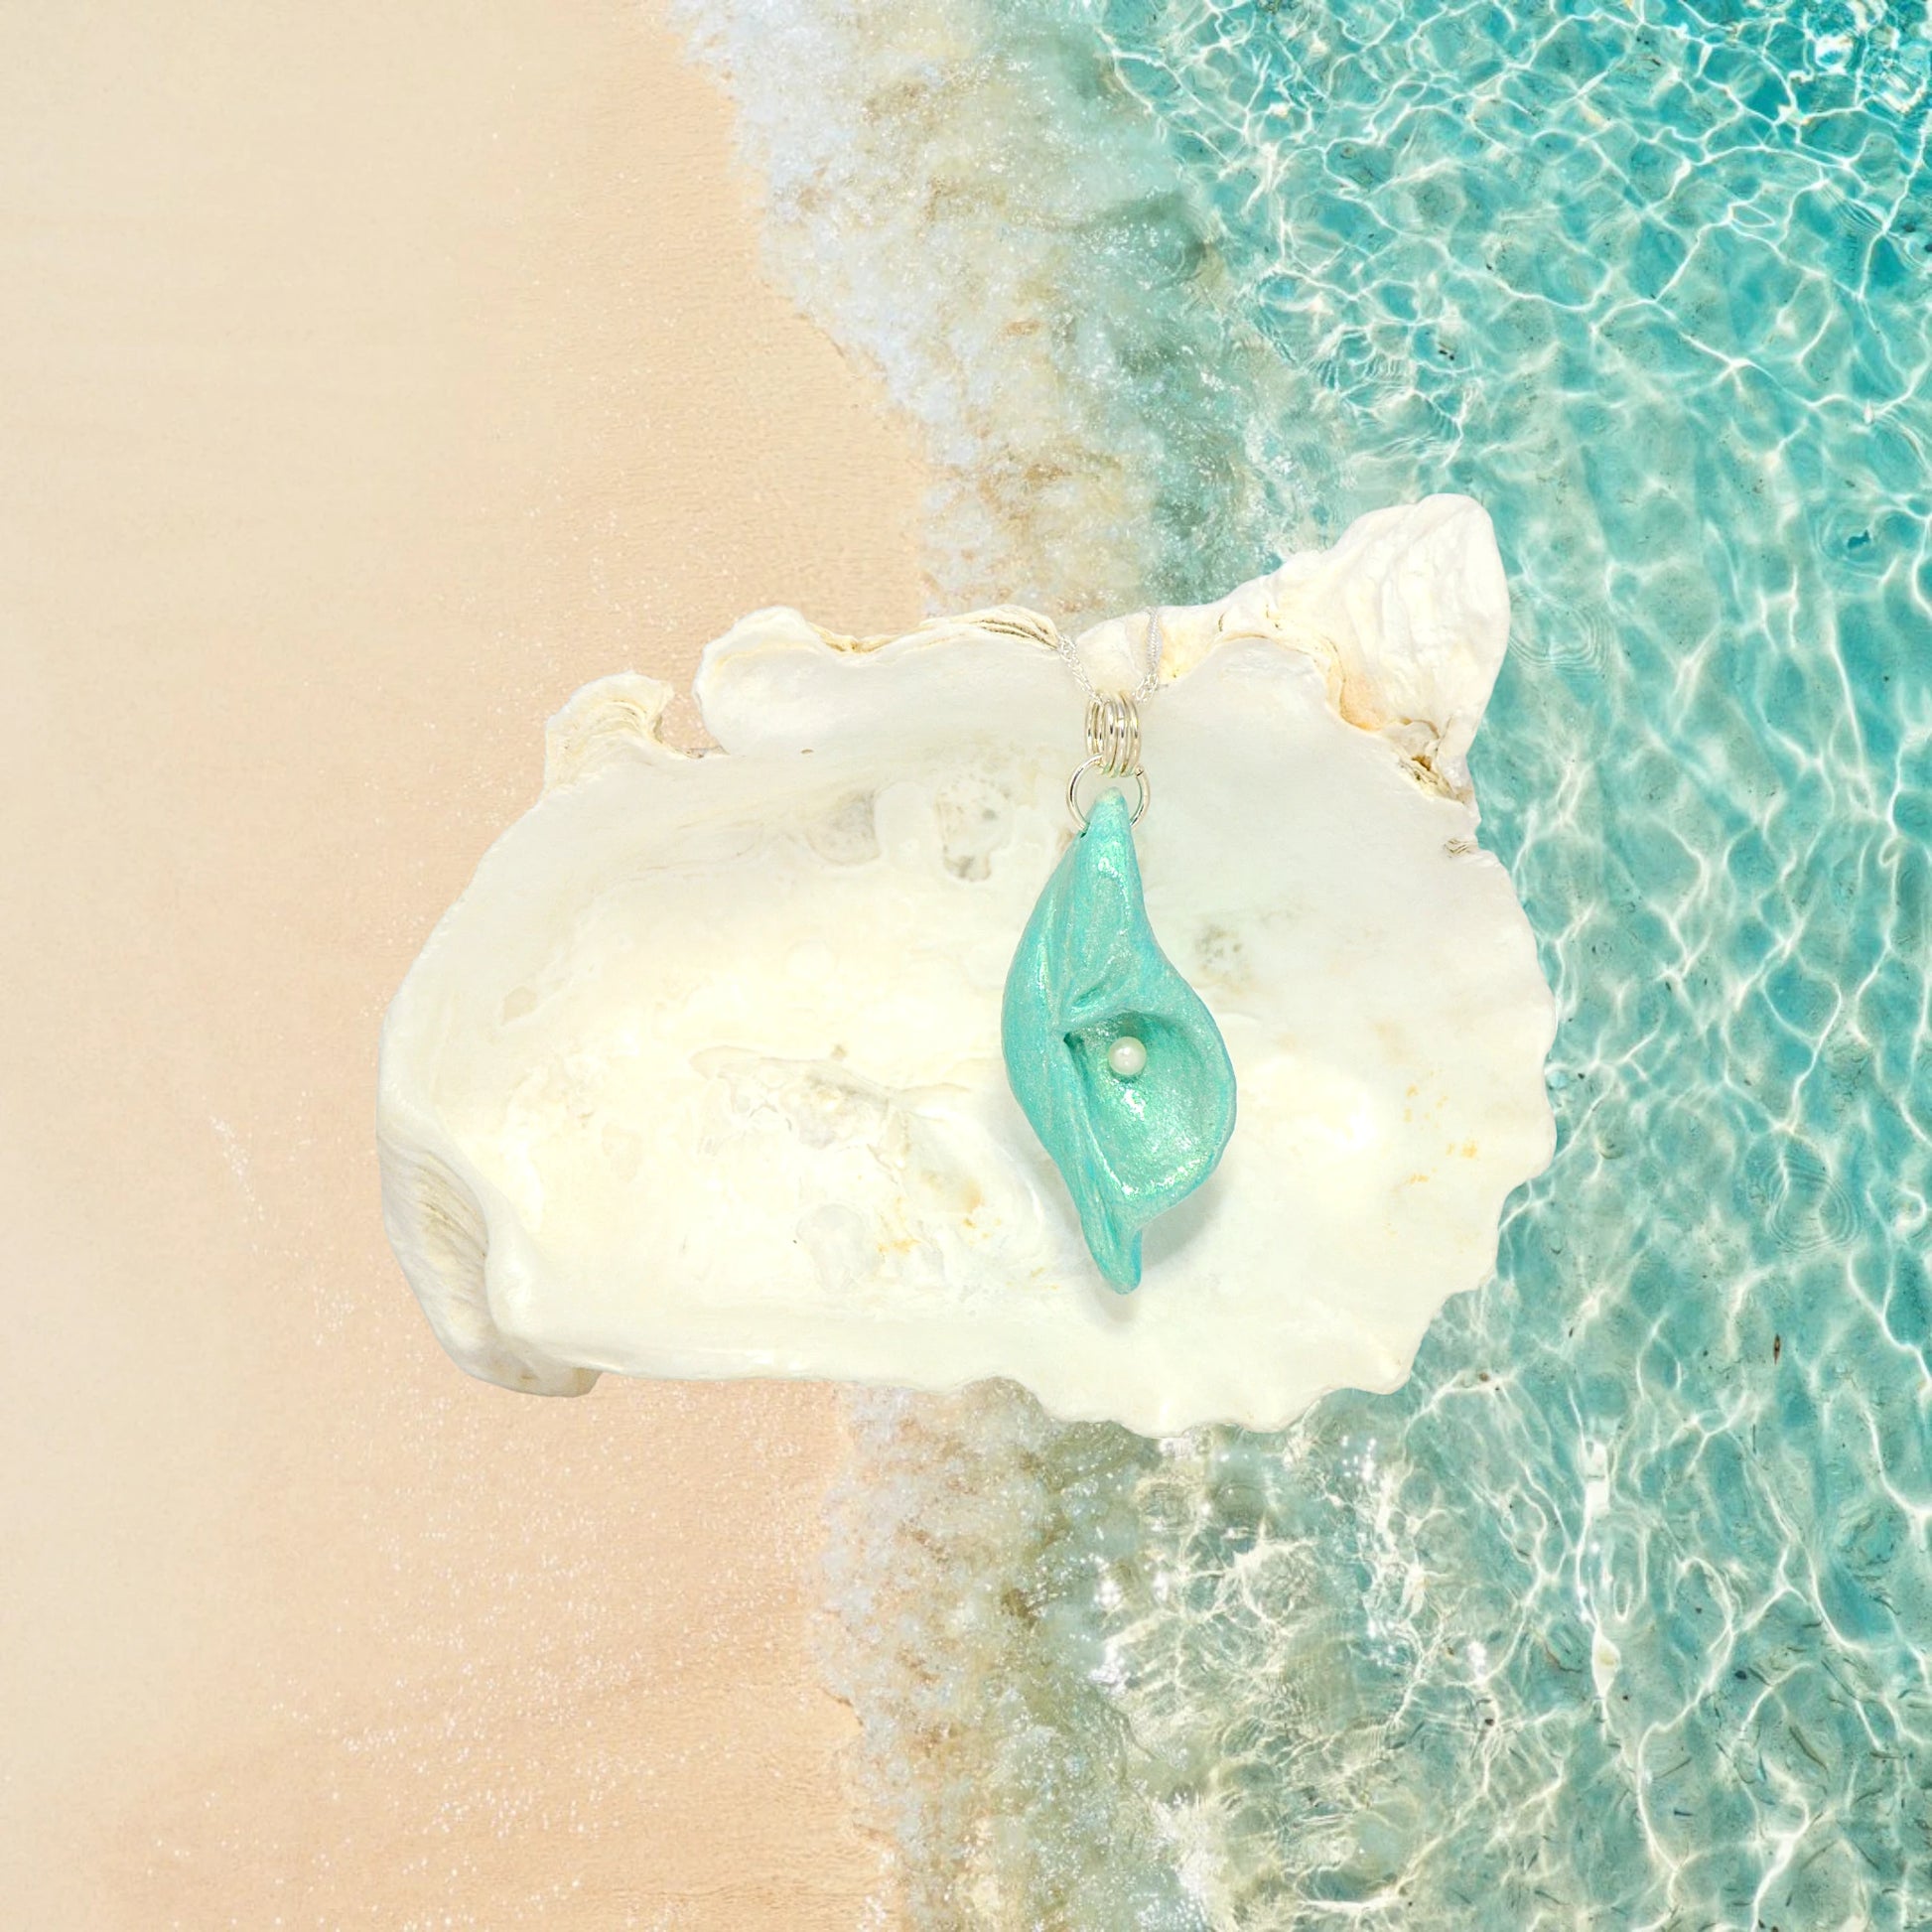 Ocean Pearl natural seashell pendant has a  real freshwater baby pearl. The pendant is shown in front of a larger seashell.  The beach and the ocean meet in the background.